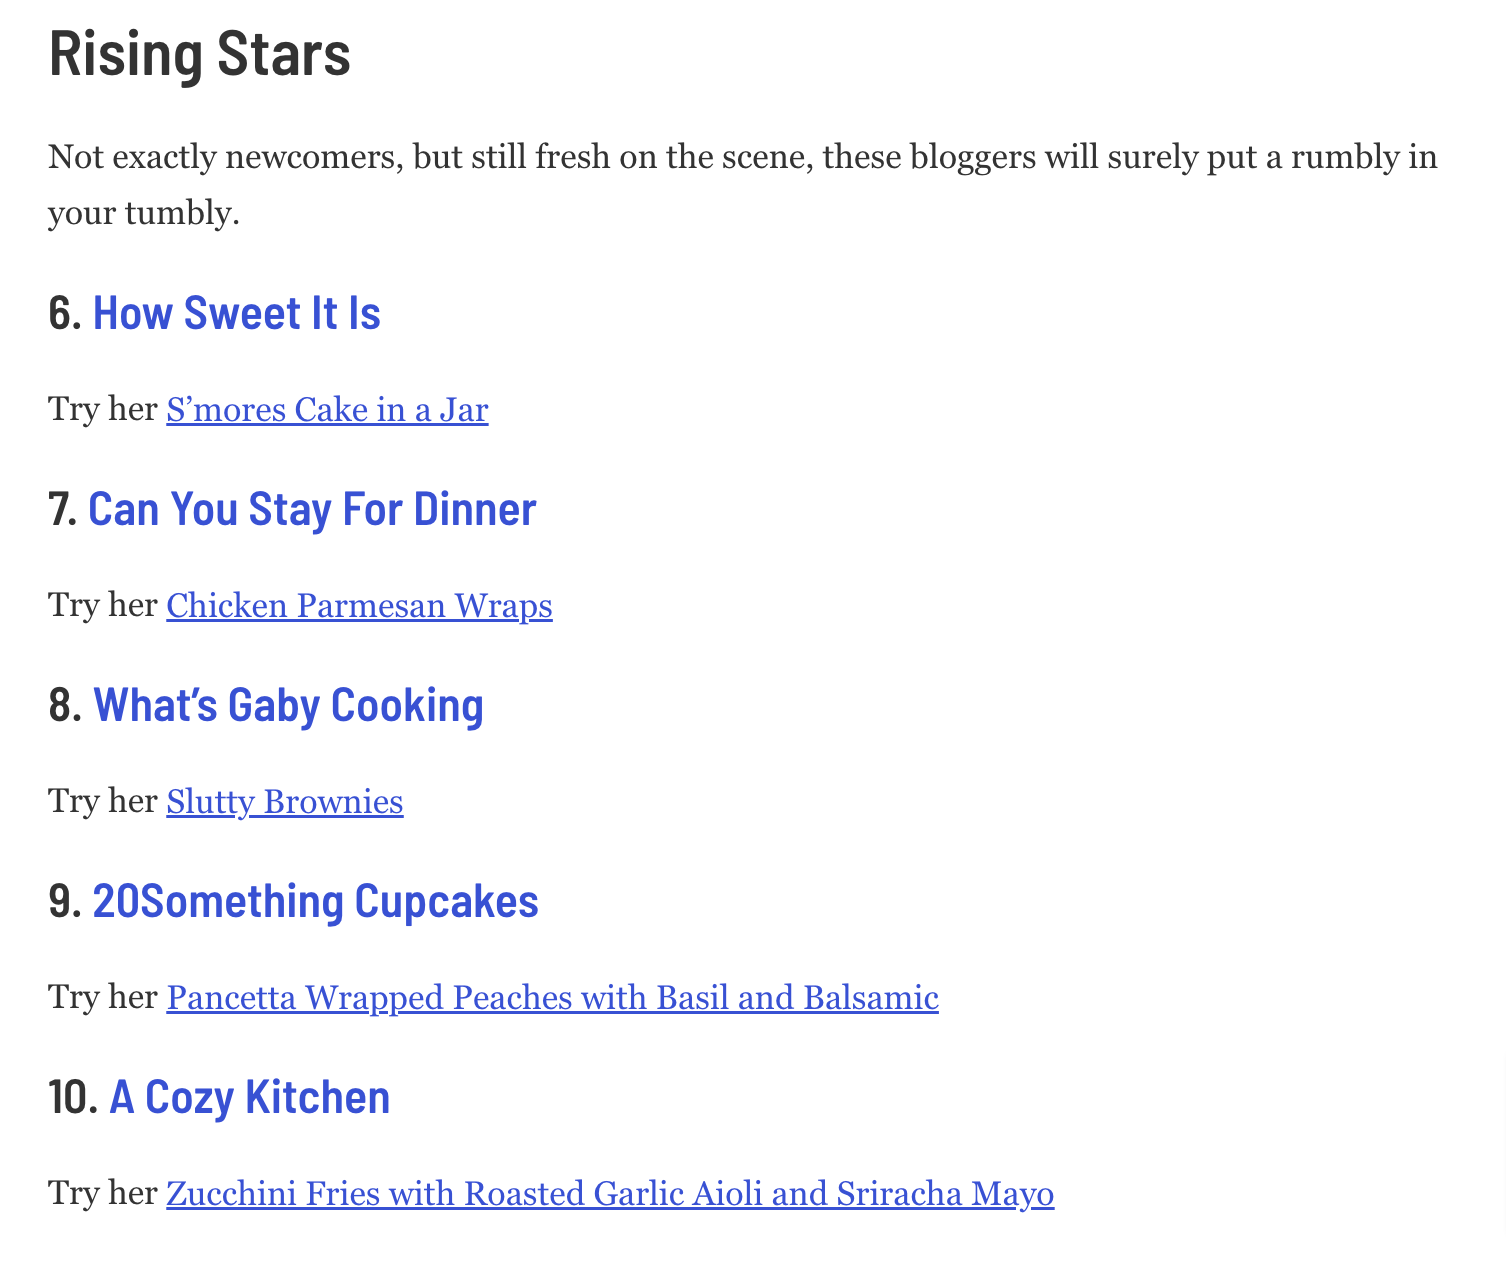 "Rising stars" section in a newsletter
